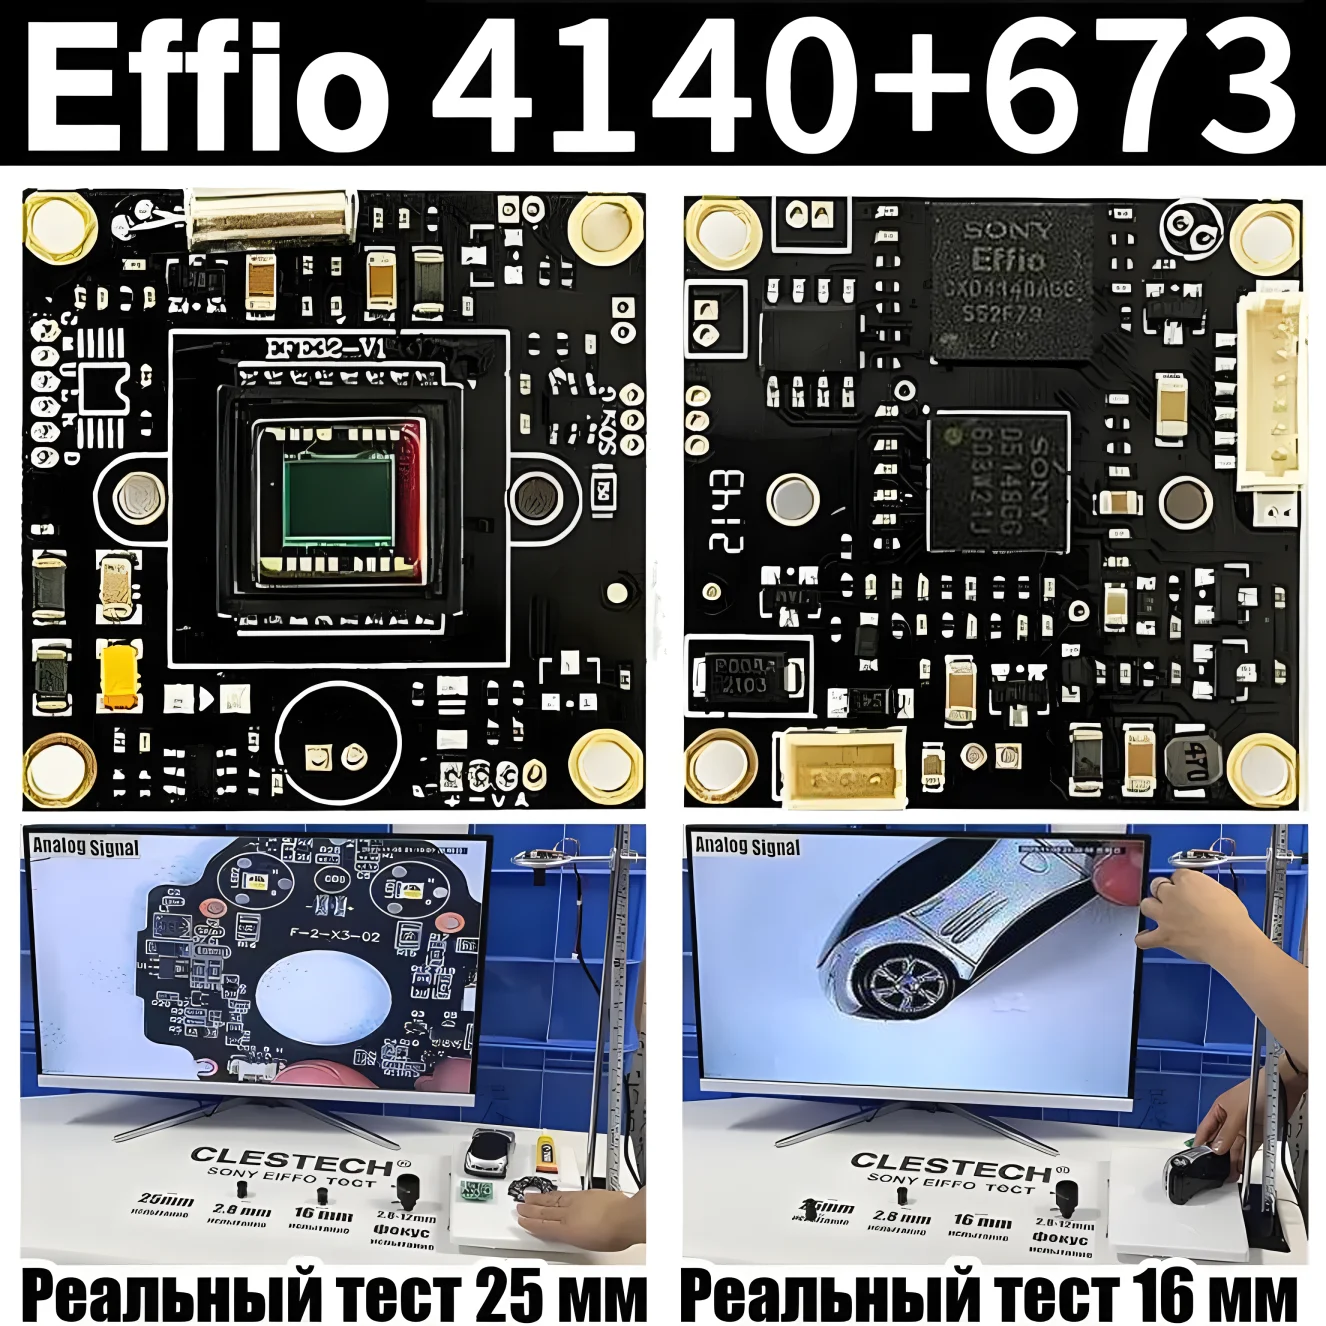 CLESTECH Camera Module Sony Effio CCD 4140+673 800TVL Chip Circuit Board HD CCTV Analog 960H OSD Cable Microscope DIY Monitoring cvbs 800tvl hd color analog camera module cctv security camera t bullet shapped board cmos sensor for industry machine